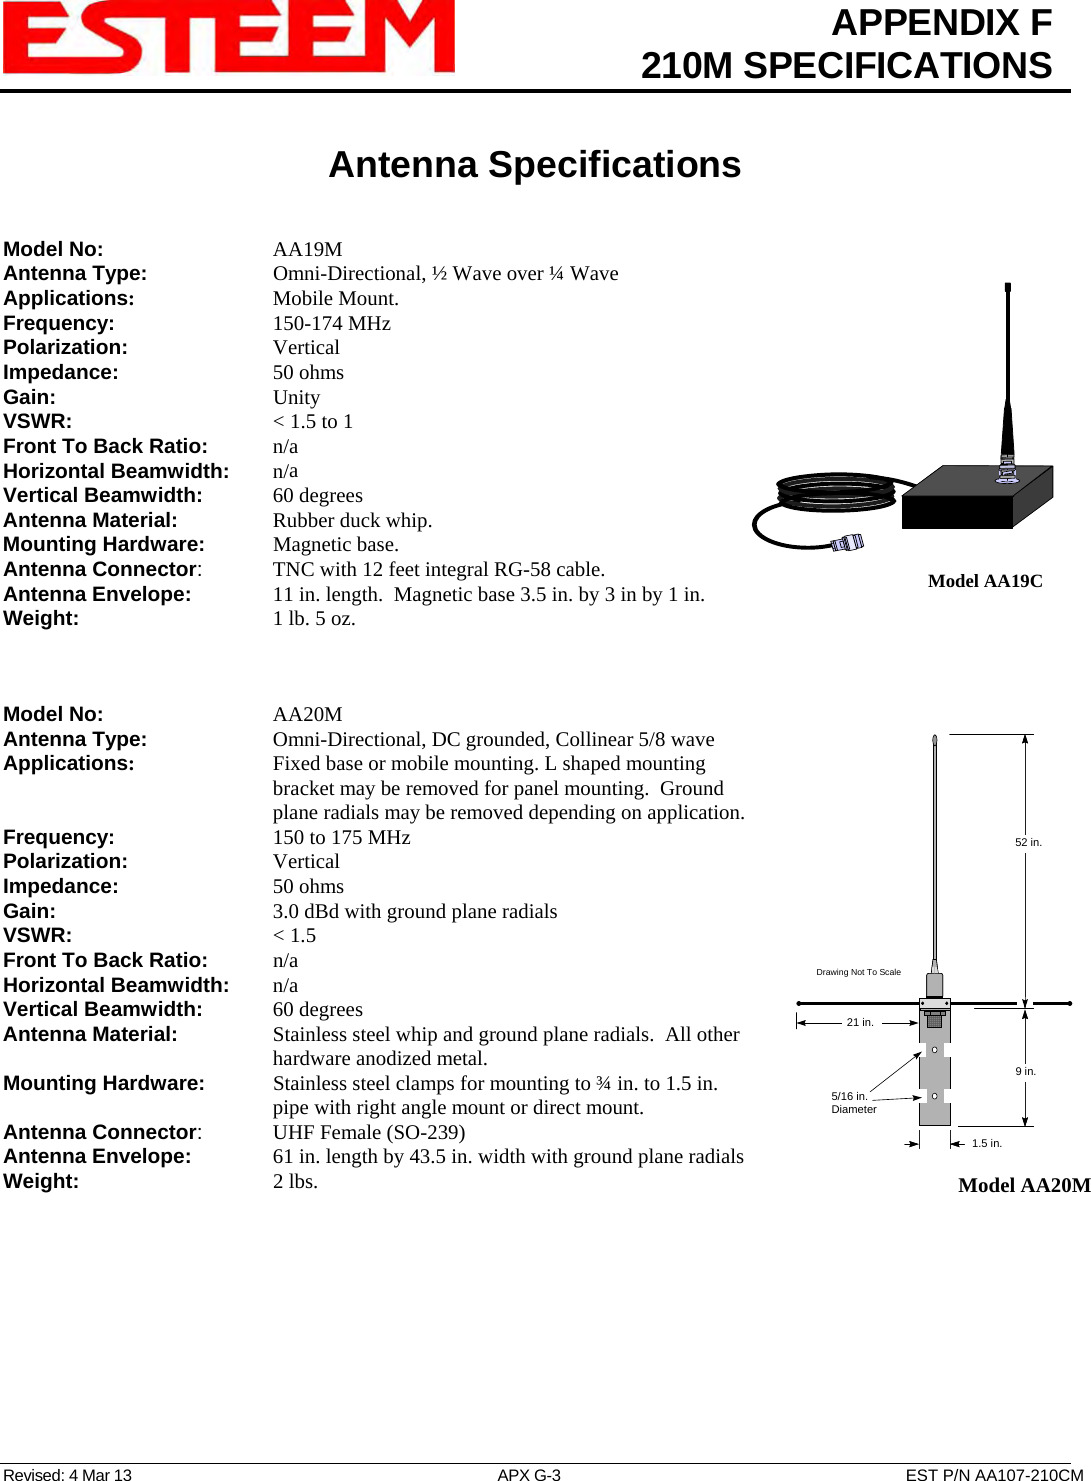  APPENDIX F  210M SPECIFICATIONS   Antenna Specifications   Revised: 4 Mar 13  APX G-3  EST P/N AA107-210CM Model No:    AA19M Antenna Type:   Omni-Directional, ½ Wave over ¼ Wave Model AA19CApplications:    Mobile Mount. Frequency:    150-174 MHz  Polarization:    Vertical Impedance:    50 ohms Gain:     Unity VSWR:      &lt; 1.5 to 1  Front To Back Ratio:   n/a Horizontal Beamwidth:  n/a Vertical Beamwidth:     60 degrees Antenna Material:     Rubber duck whip.  Mounting Hardware:      Magnetic base.  Antenna Connector:   TNC with 12 feet integral RG-58 cable. Antenna Envelope:   11 in. length.  Magnetic base 3.5 in. by 3 in by 1 in. Weight:           1 lb. 5 oz.     Model No:    AA20M  1.5 in.9 in.Drawing Not To Scale5/16 in.Diameter52 in.21 in.Model AA20M  Antenna Type:   Omni-Directional, DC grounded, Collinear 5/8 wave  Applications:       Fixed base or mobile mounting. L shaped mounting bracket may be removed for panel mounting.  Ground plane radials may be removed depending on application. Frequency:    150 to 175 MHz  Polarization:    Vertical Impedance:    50 ohms Gain:         3.0 dBd with ground plane radials VSWR:      &lt; 1.5  Front To Back Ratio:   n/a Horizontal Beamwidth:  n/a Vertical Beamwidth:     60 degrees Antenna Material:     Stainless steel whip and ground plane radials.  All other hardware anodized metal.  Mounting Hardware:      Stainless steel clamps for mounting to ¾ in. to 1.5 in. pipe with right angle mount or direct mount.  Antenna Connector:   UHF Female (SO-239) Antenna Envelope:   61 in. length by 43.5 in. width with ground plane radials Weight:       2 lbs. 